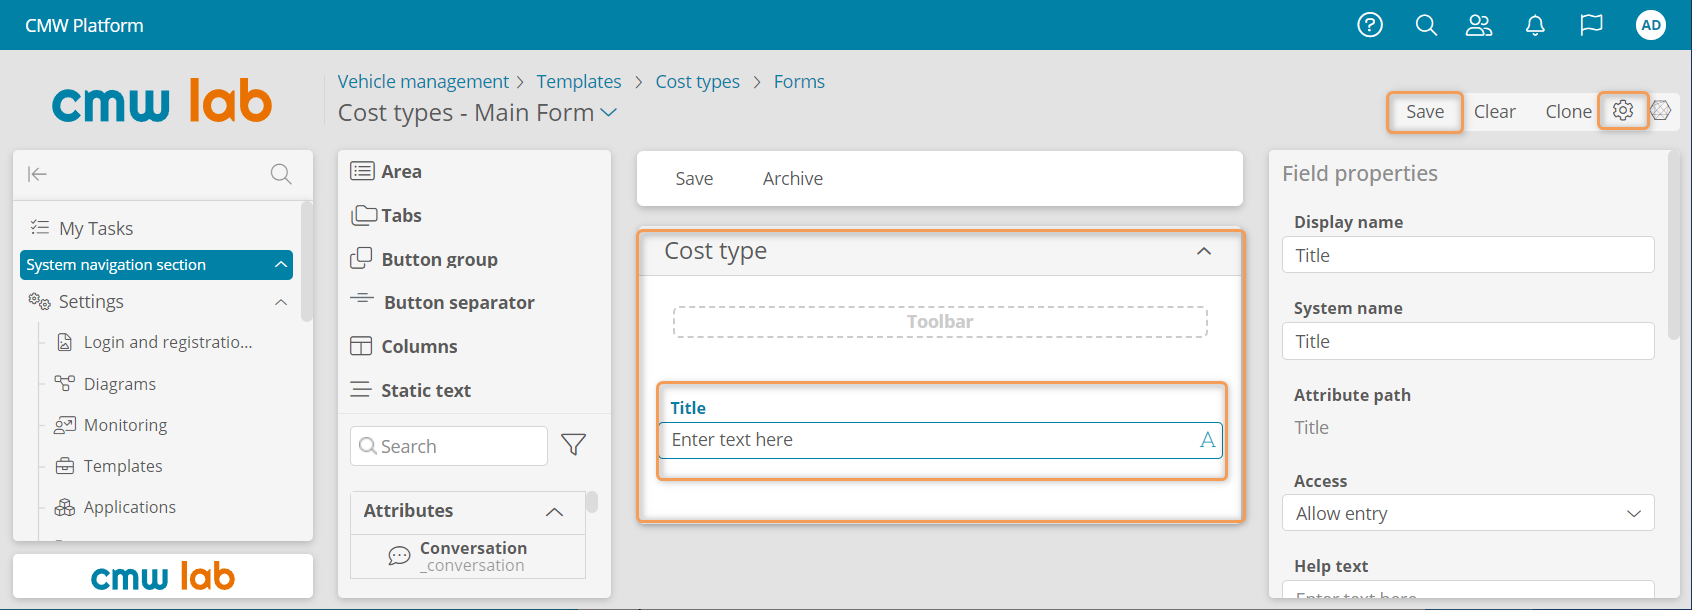 Configuring the Cost type form